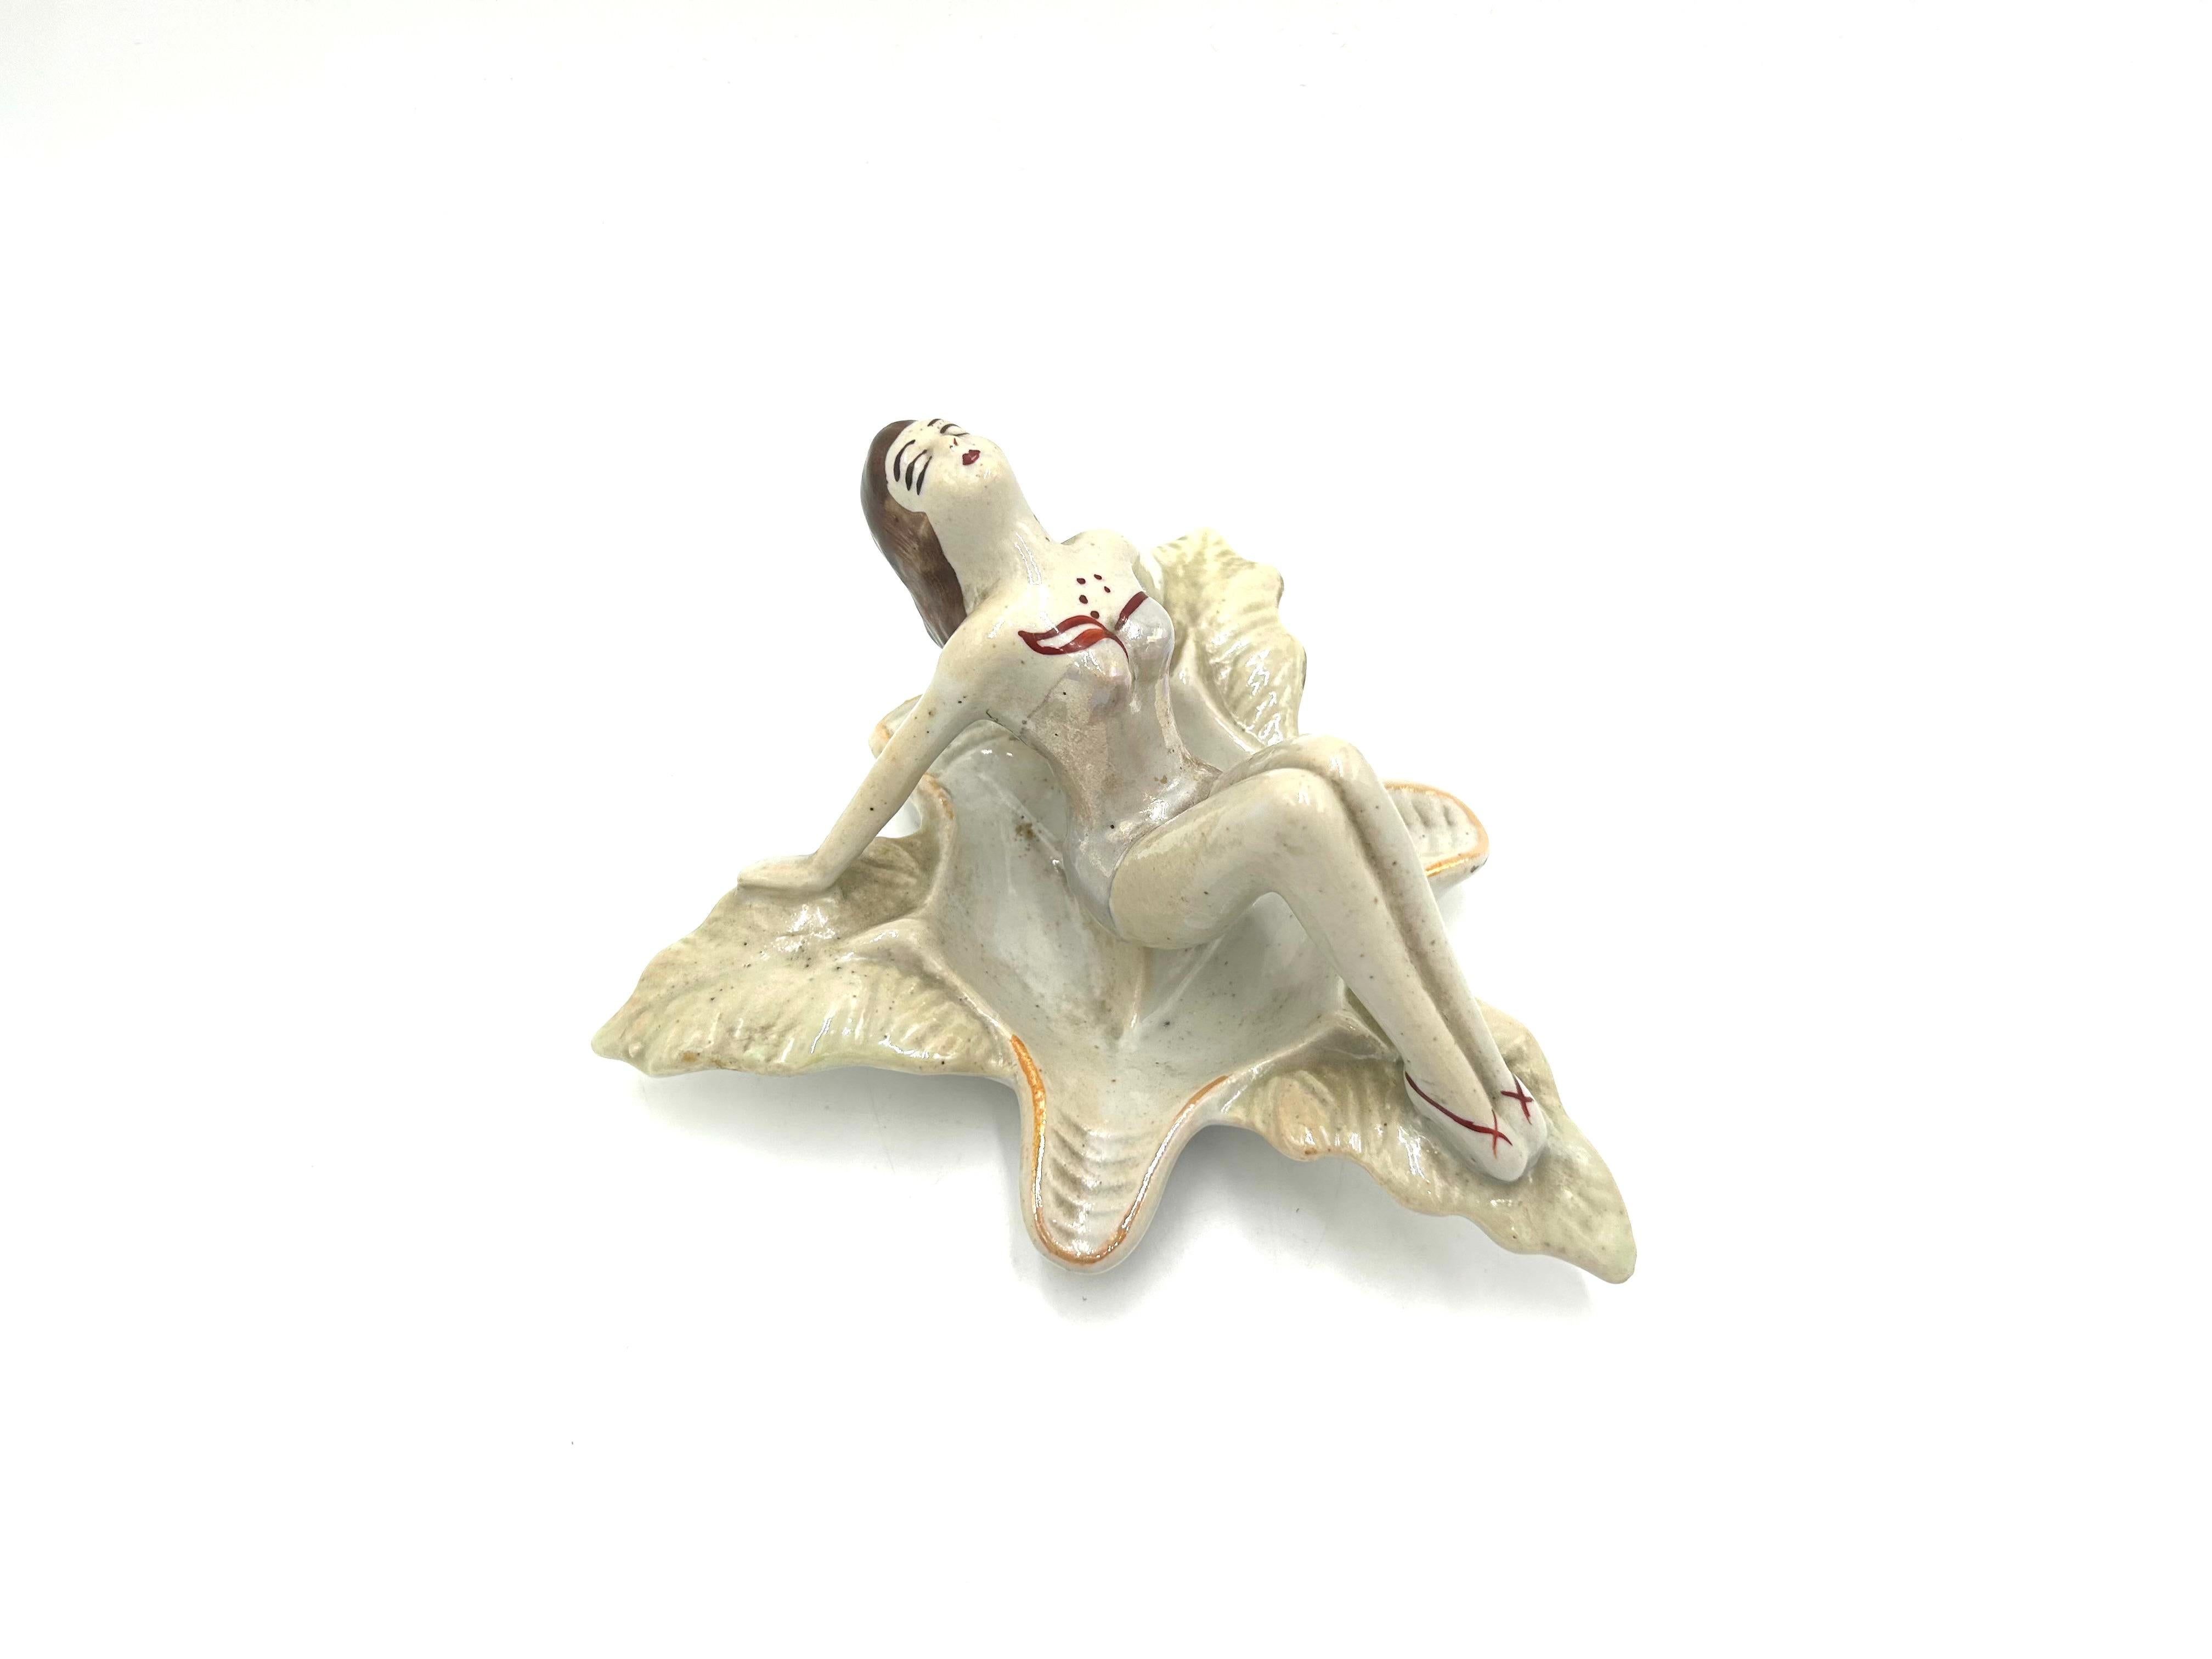 The iconic ashtray in the shape of a woman in a bathing suit sitting on a leaf. Designed by Zygmunt Buksowicz for the Steatyt factory in Katowice.

Very good condition, no damage

height 10cm width 17x17cm